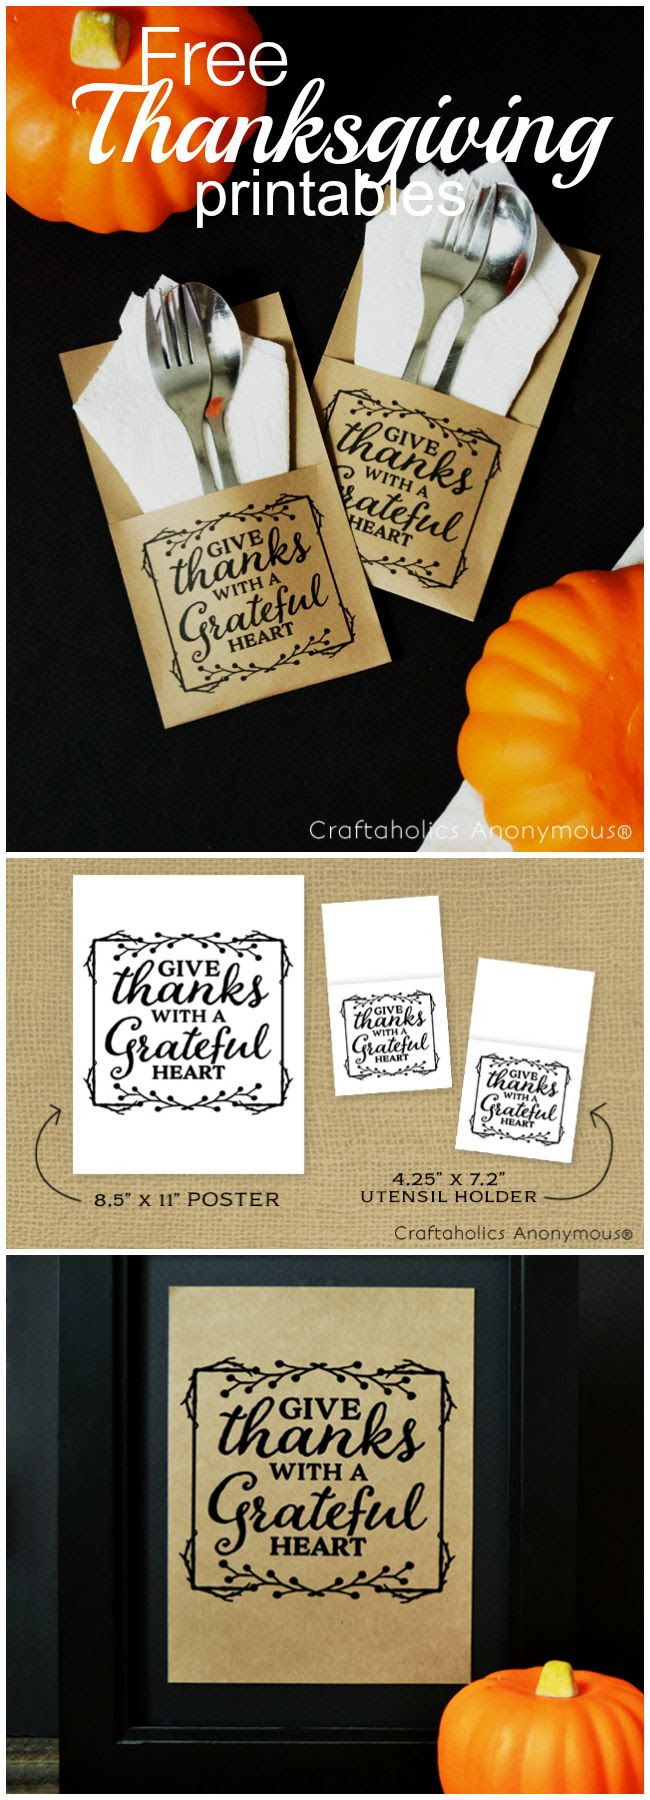 Free Thanksgiving Day Printables. Print on kraft paper for a rustic look. Love the smaller file for Utensil holders!